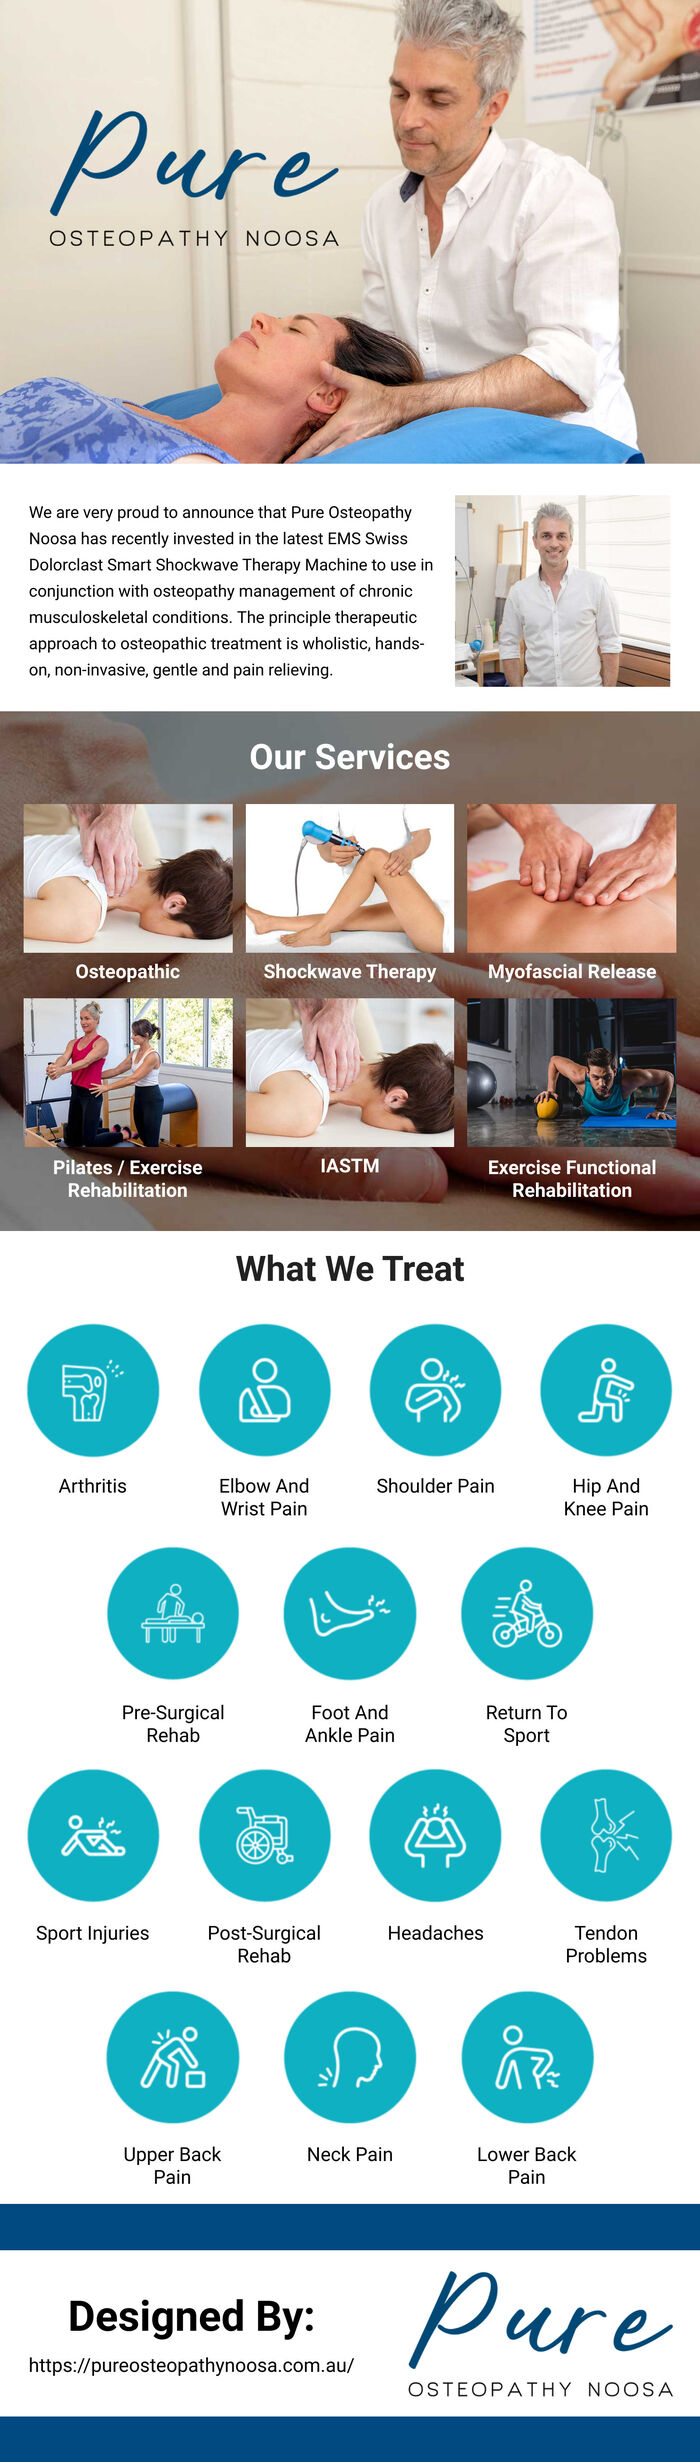 This infographic is designed by Pure Osteopathy